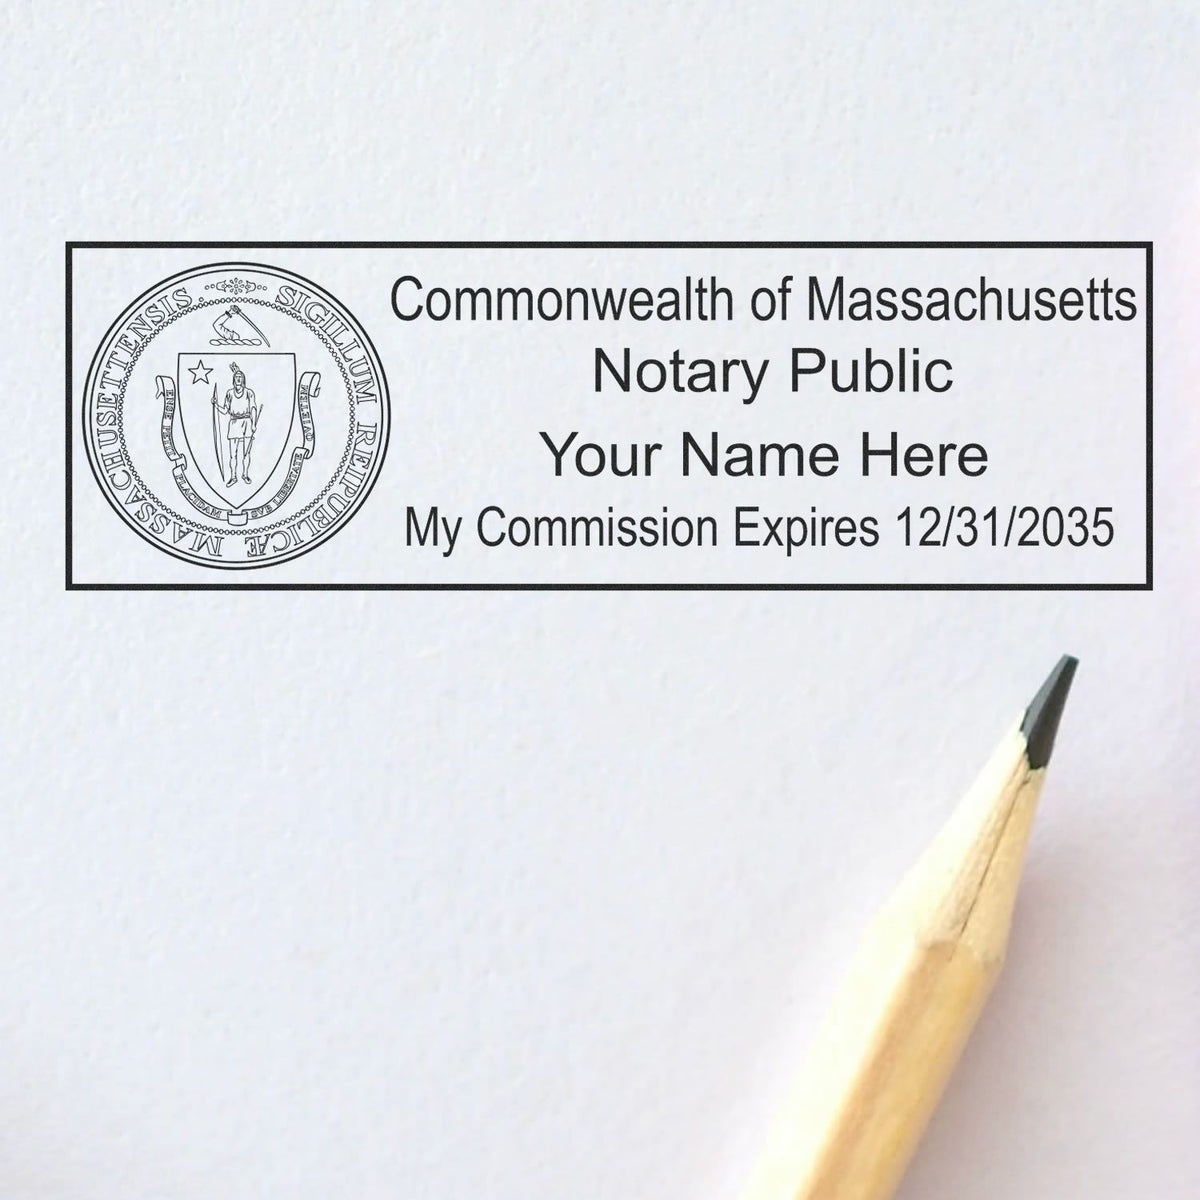 The Self-Inking State Seal Massachusetts Notary Stamp stamp impression comes to life with a crisp, detailed photo on paper - showcasing true professional quality.